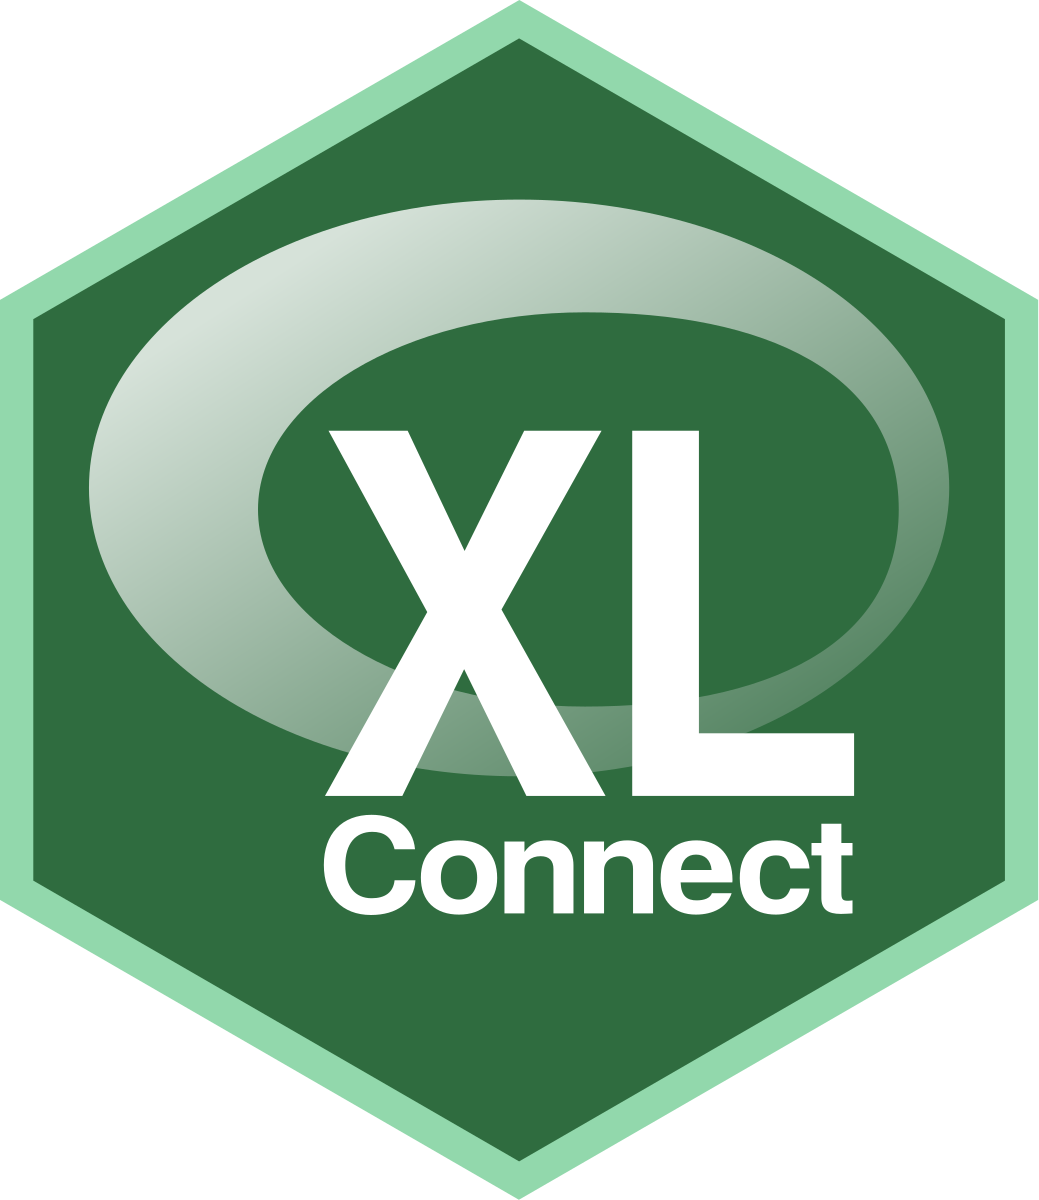 XLConnect